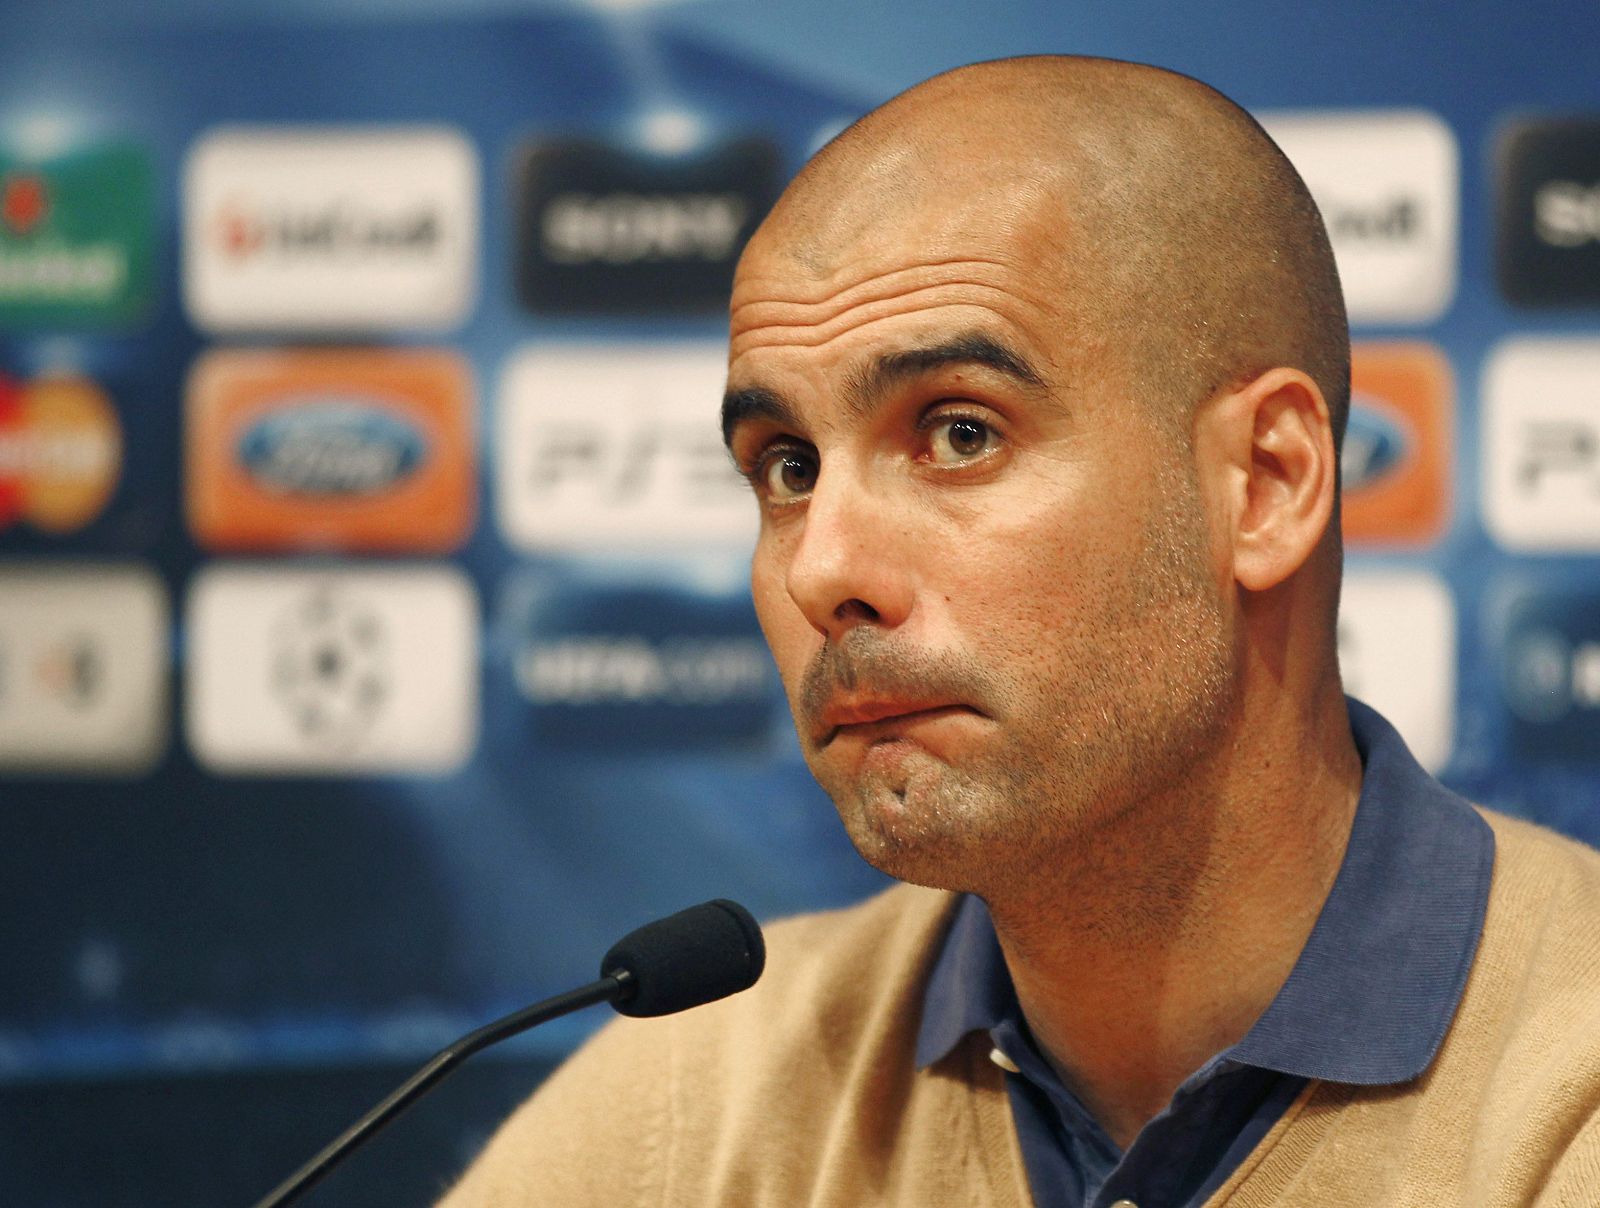 Barcelona's coach Pep Guardiola answers a question during a news conference at Nou Camp stadium in Barcelona